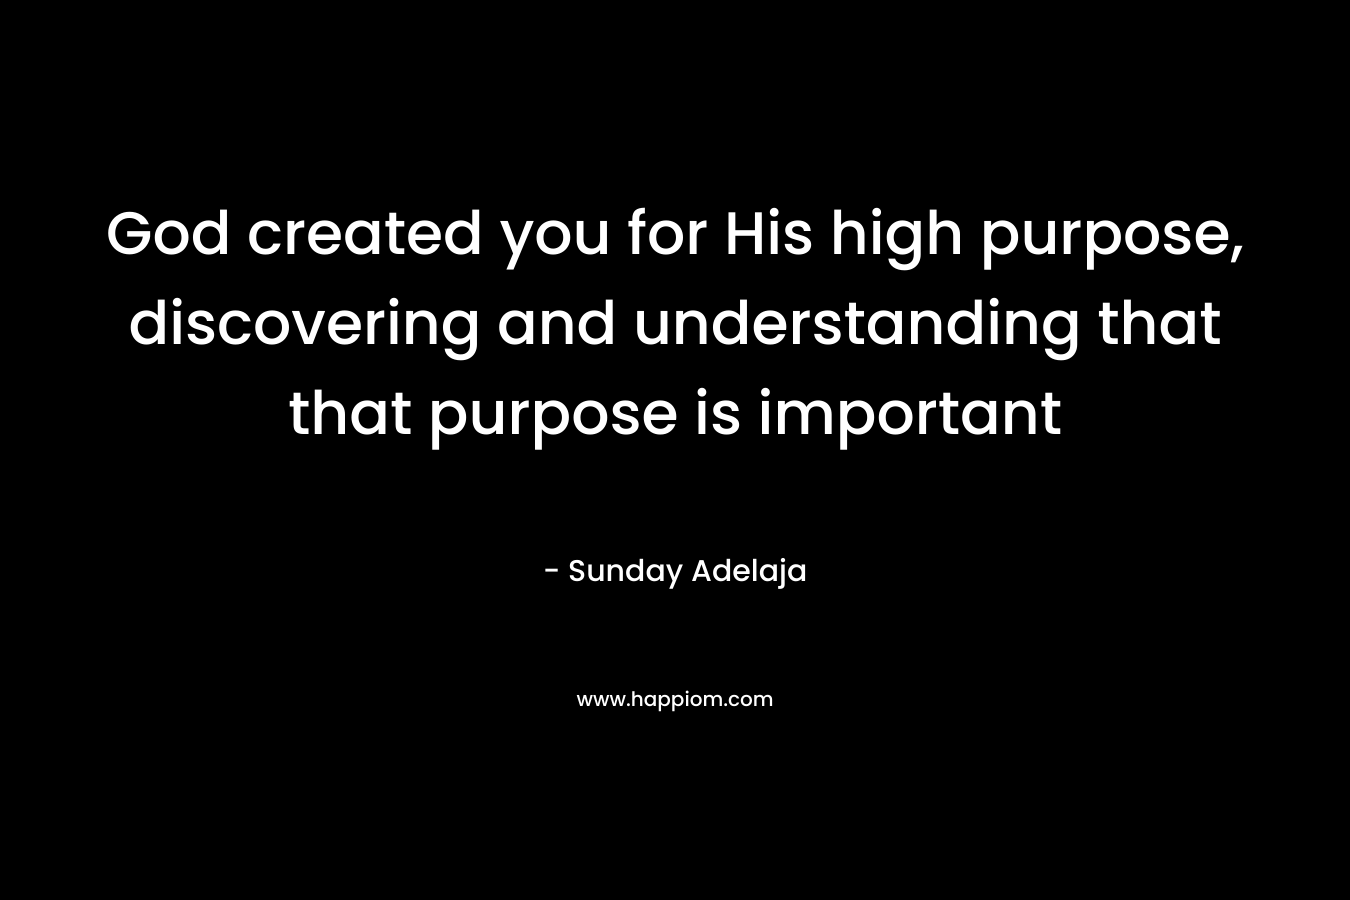 God created you for His high purpose, discovering and understanding that that purpose is important